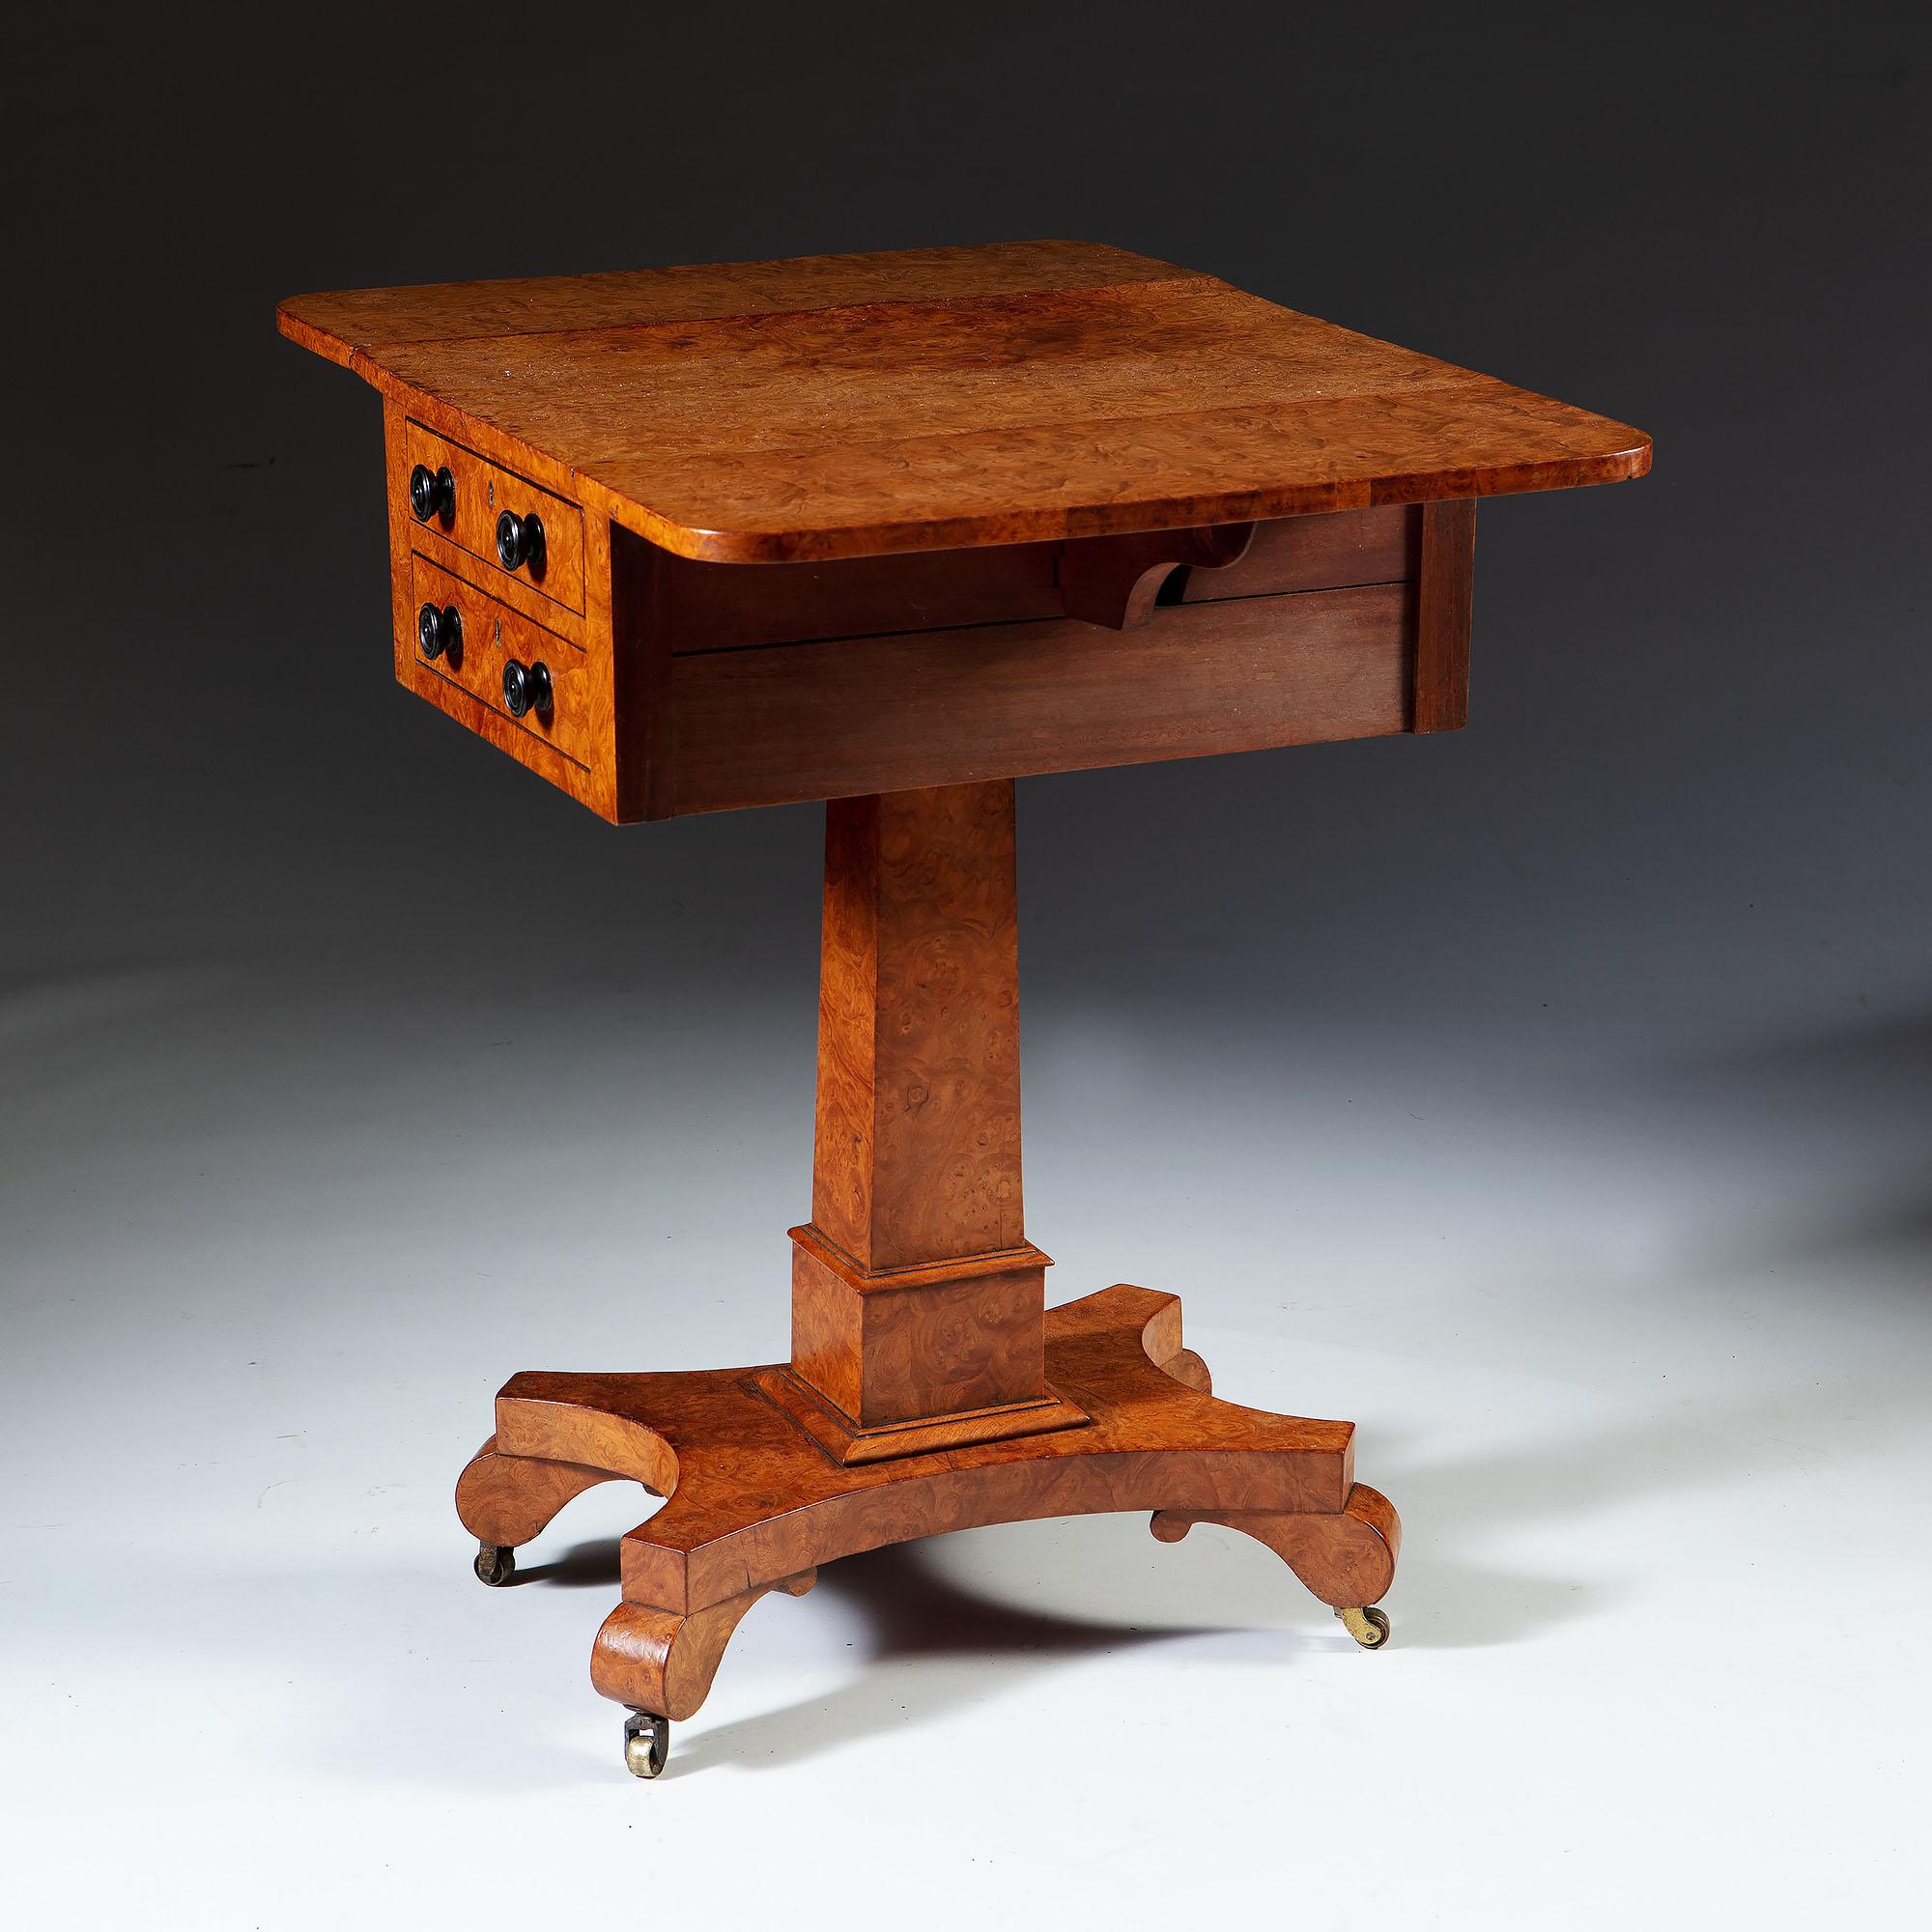 A fine 19th century burr ash work table, with drop leaf sides and two drawers to the front, the back finished with two dummy drawers to mirror the front, all supported on a quadruped base with brass castors.